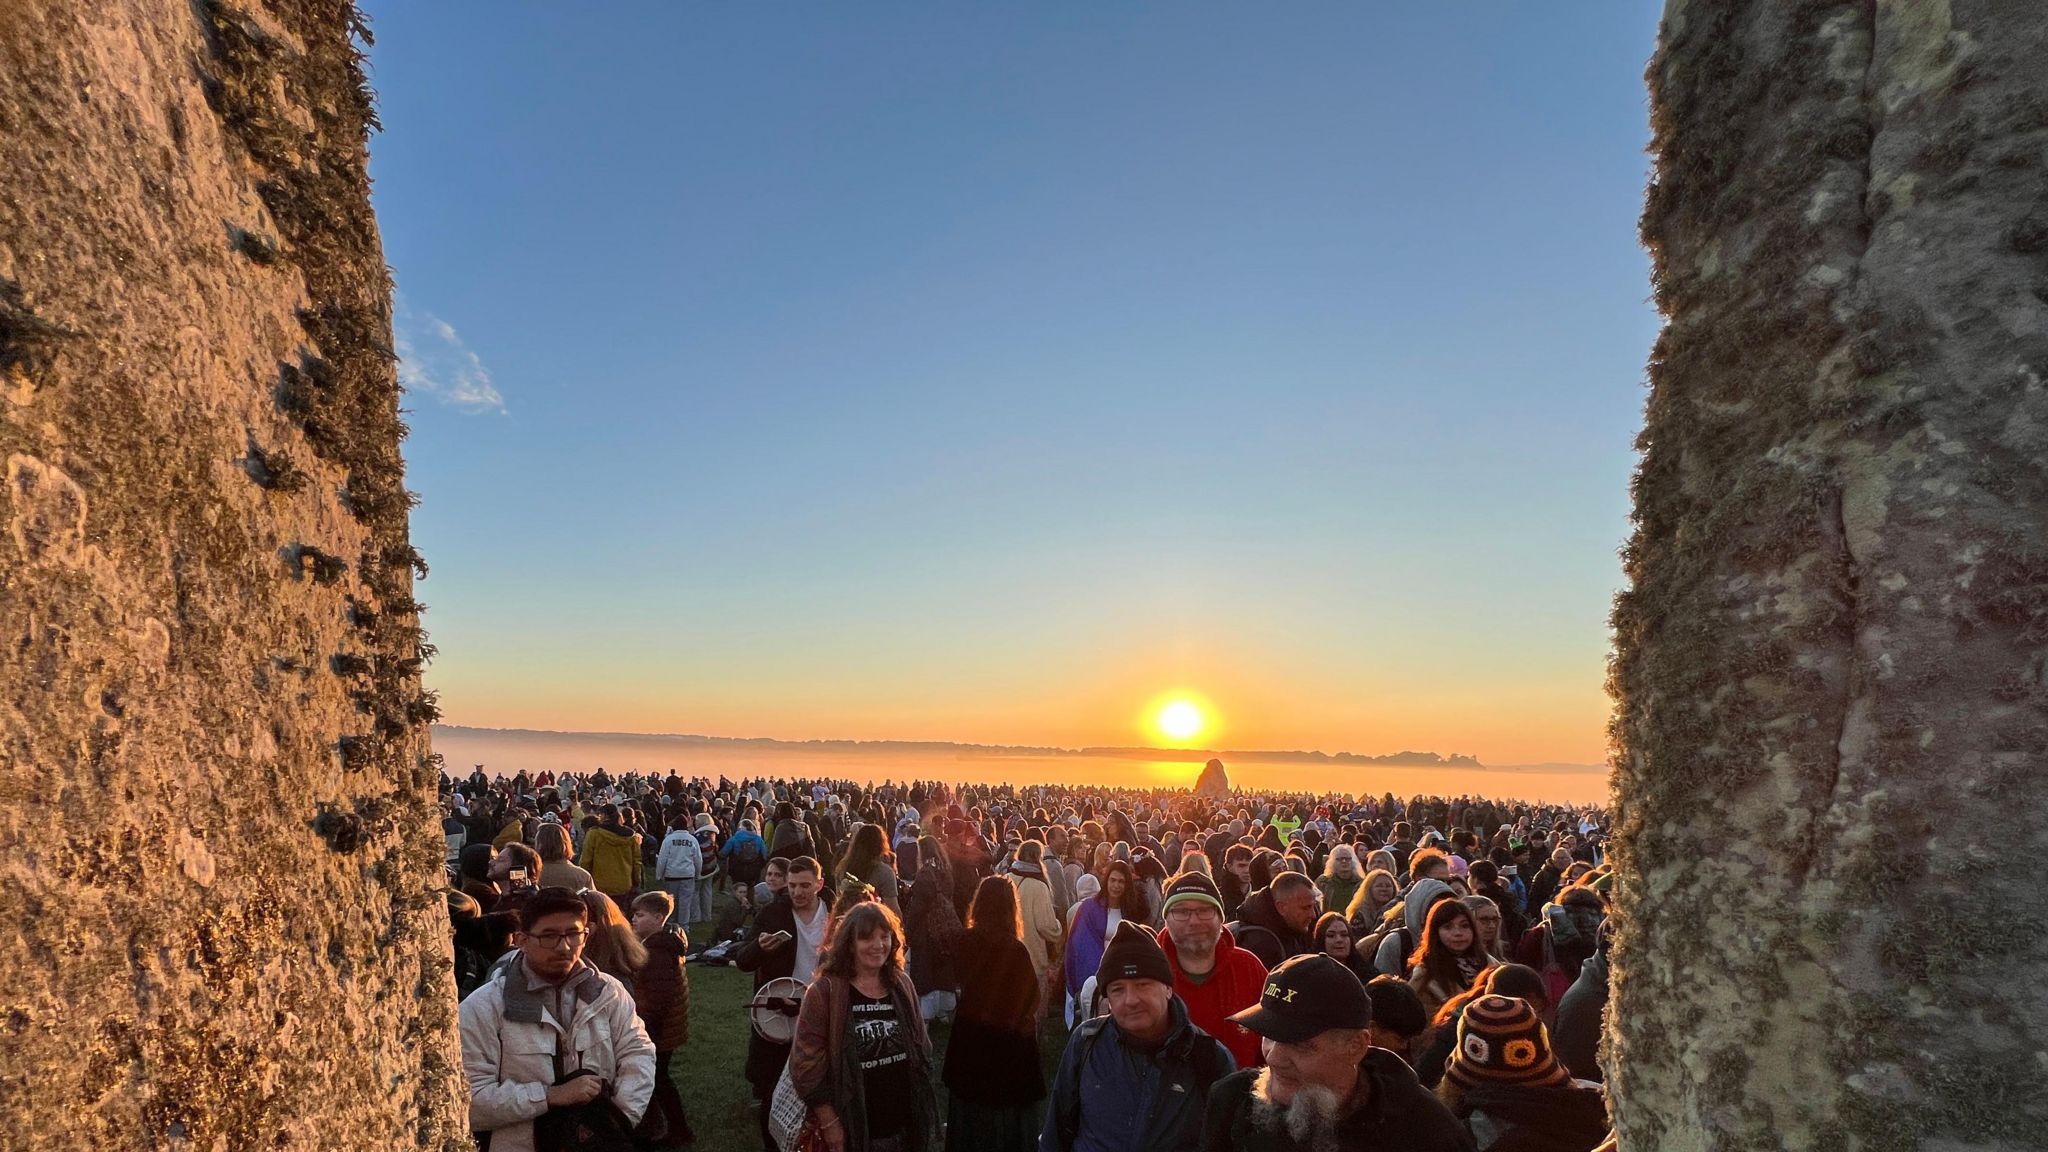 A shot through the stones of the crowd with the sun in the background